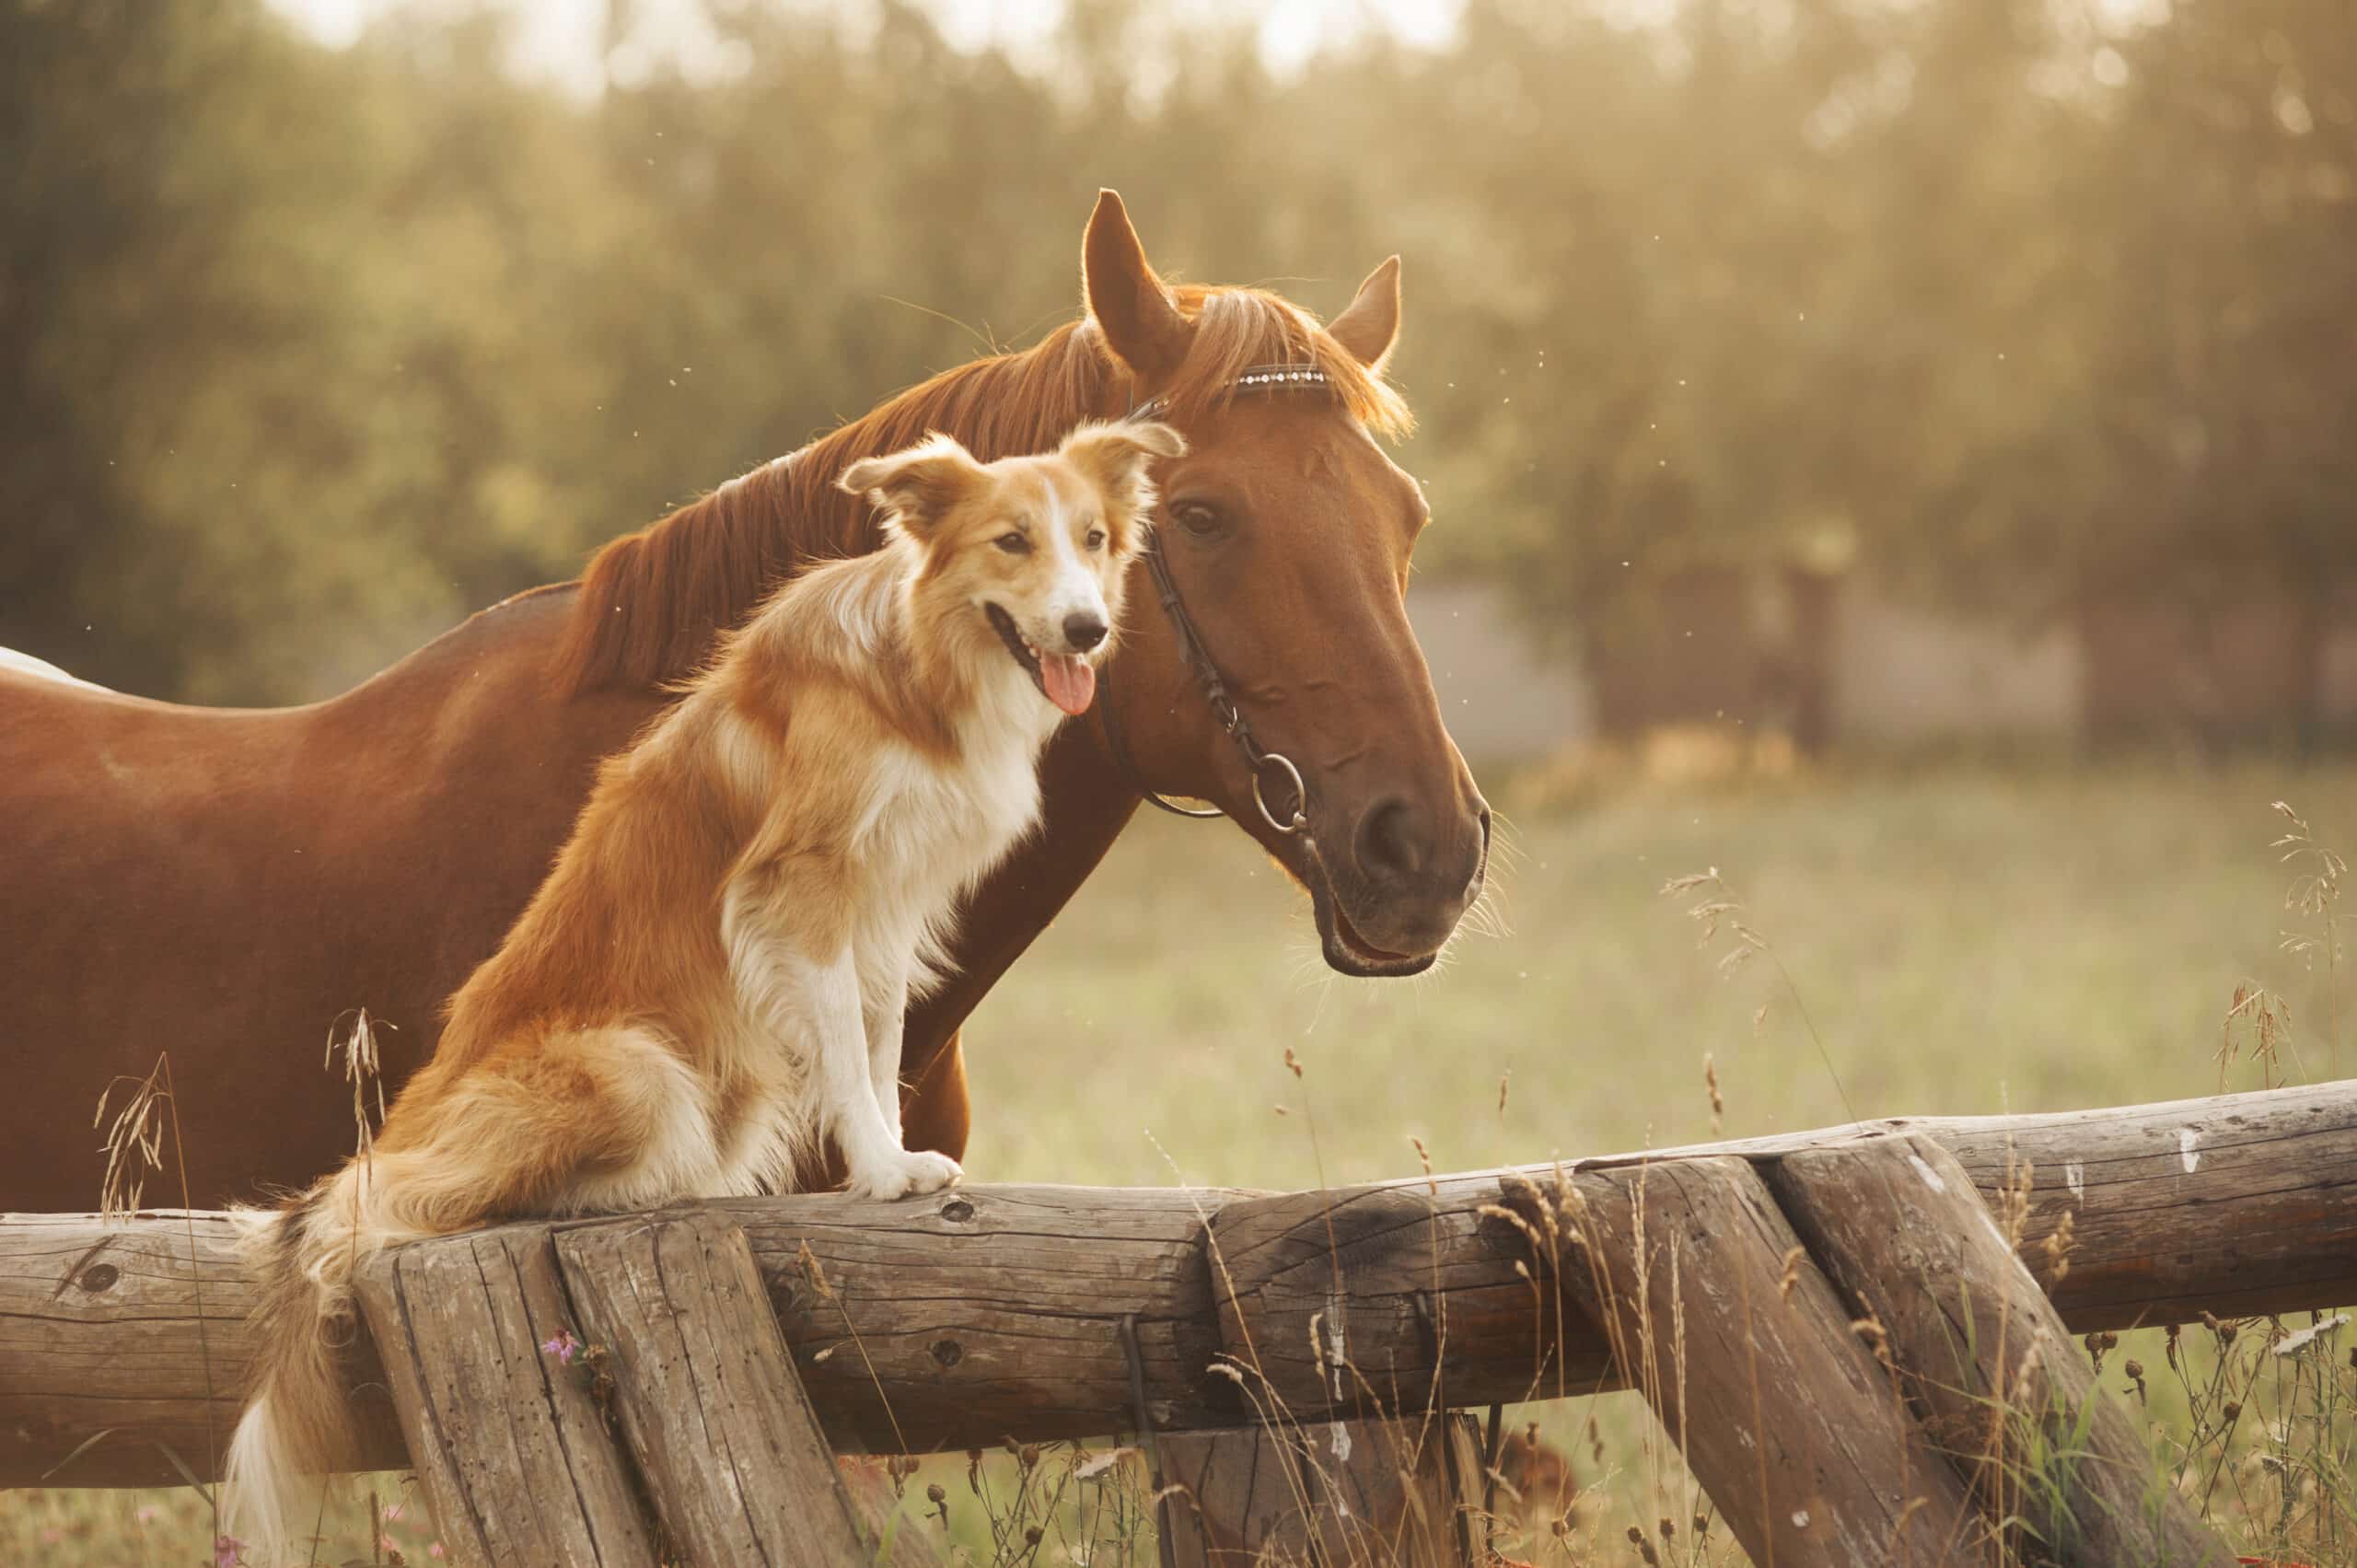 Red border collie dog and horse together at sunset in summer. livestock fencing